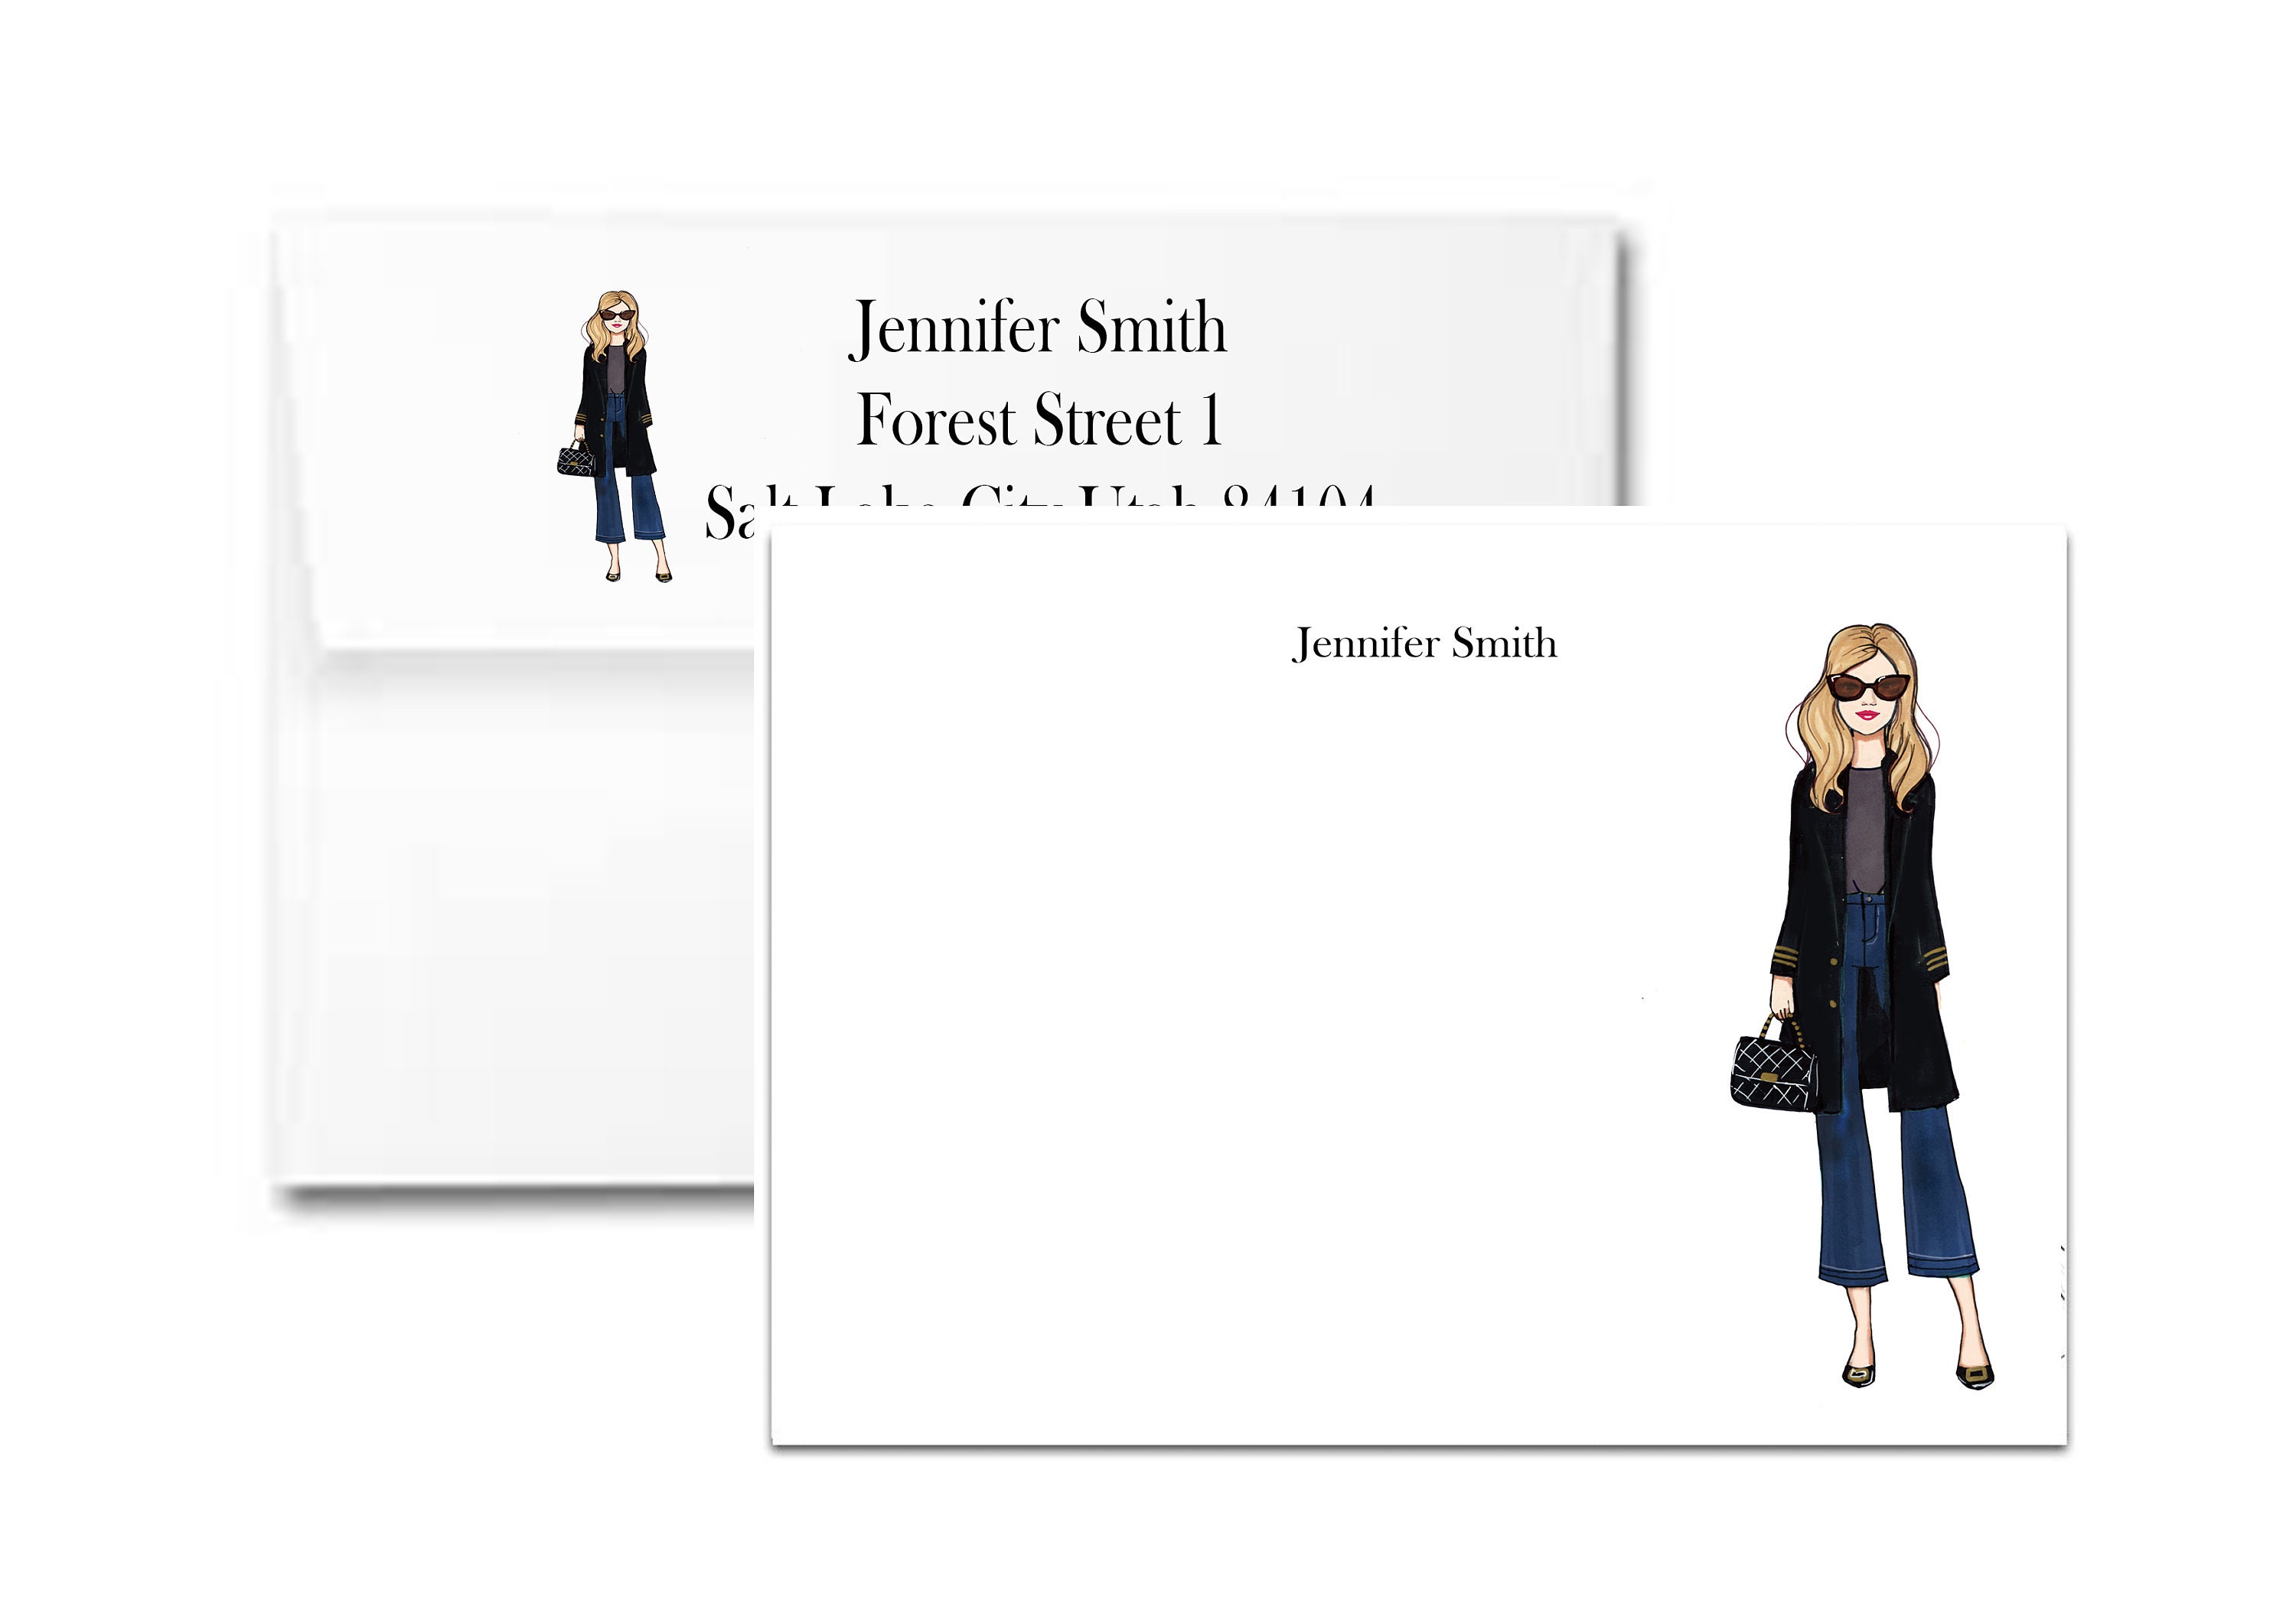 Personalized Stationary, Stationery Cards, Teacher Gift